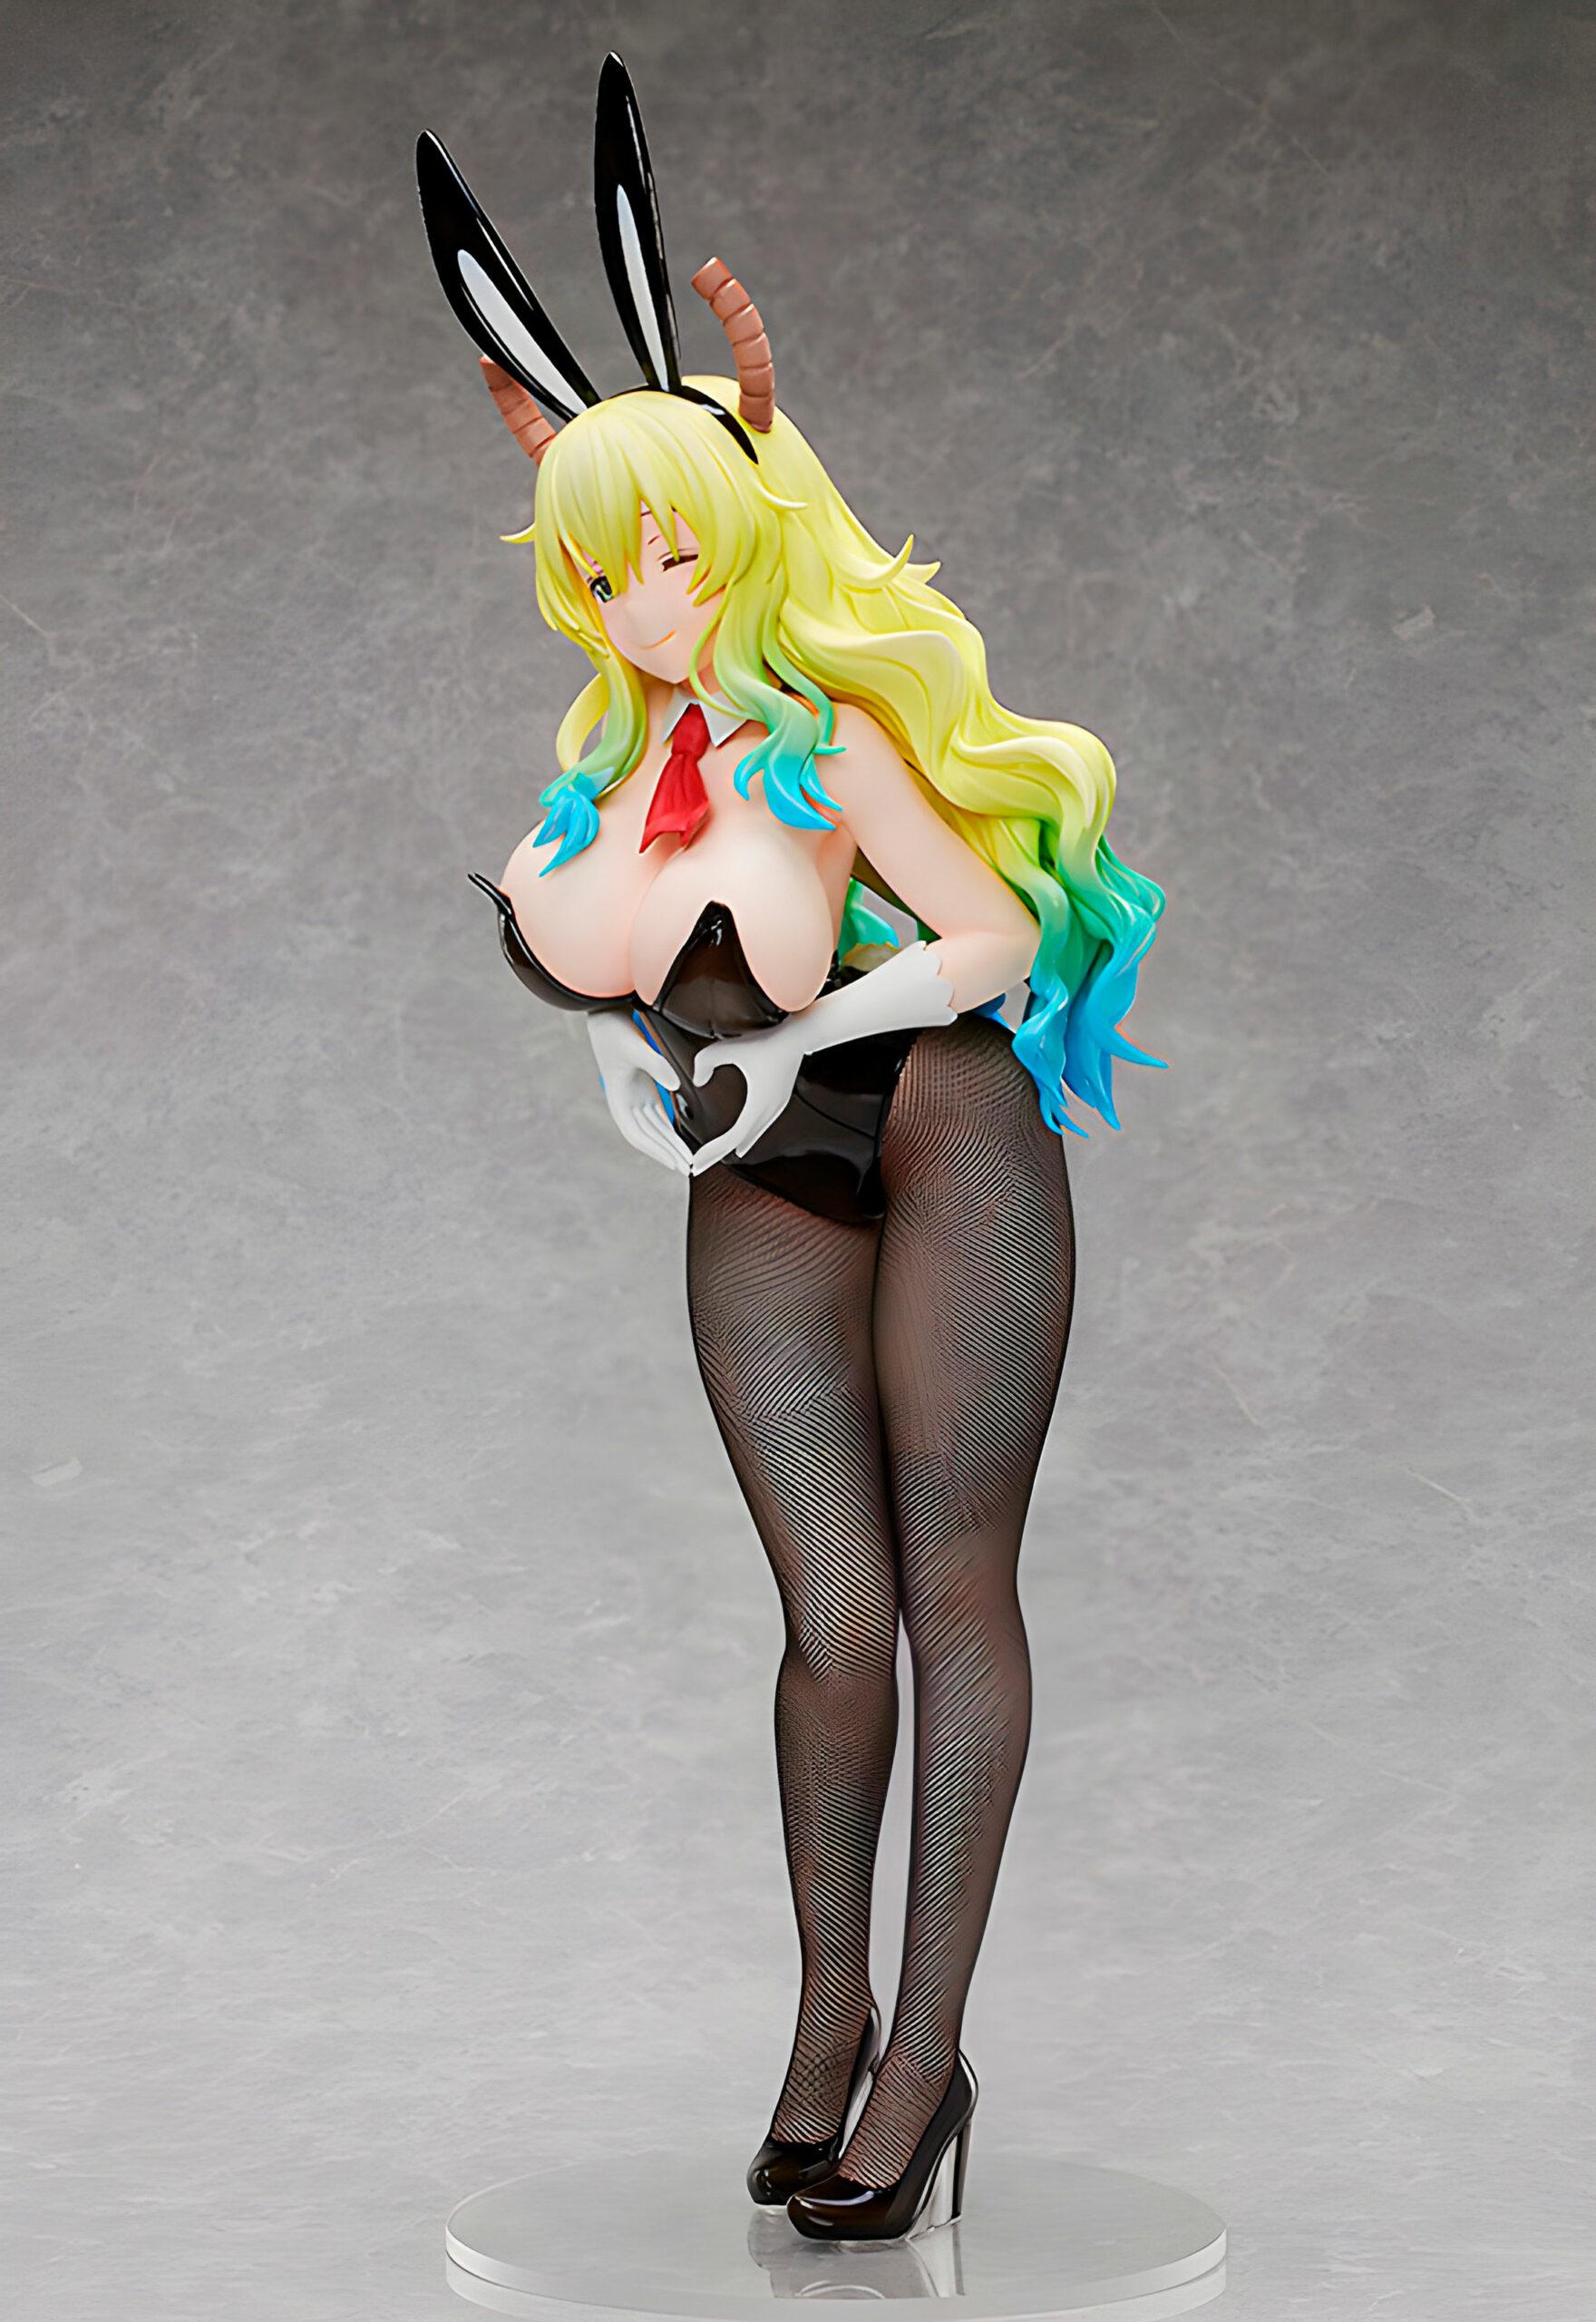 Lucoa Dresses Up As A Sensual Bunny For One Character